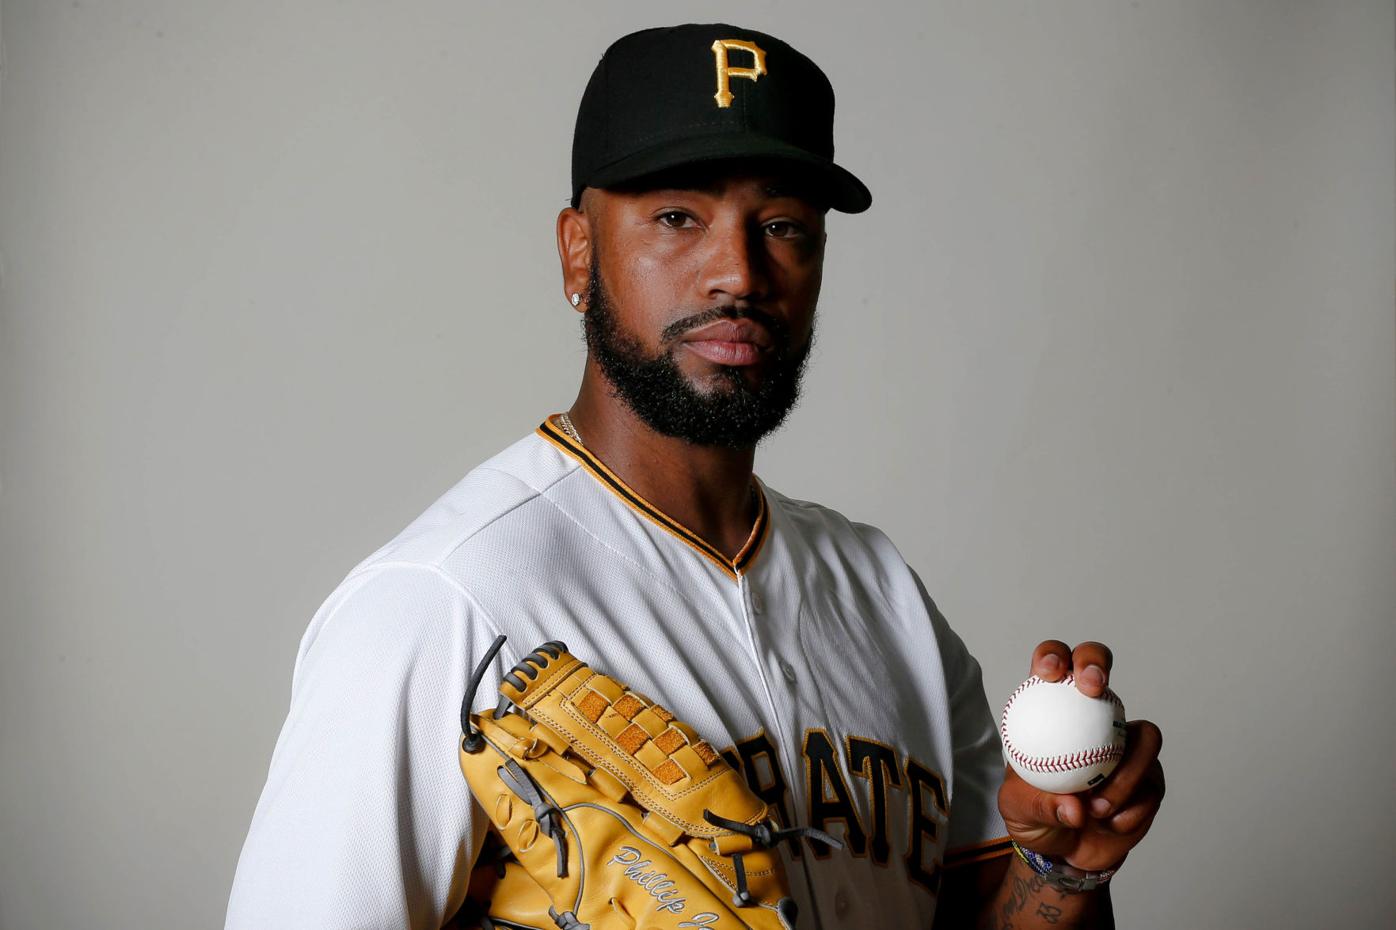 Felipe Vazquez Admitted to Sex Acts With a 13-Year-Old, Police Say - The  New York Times